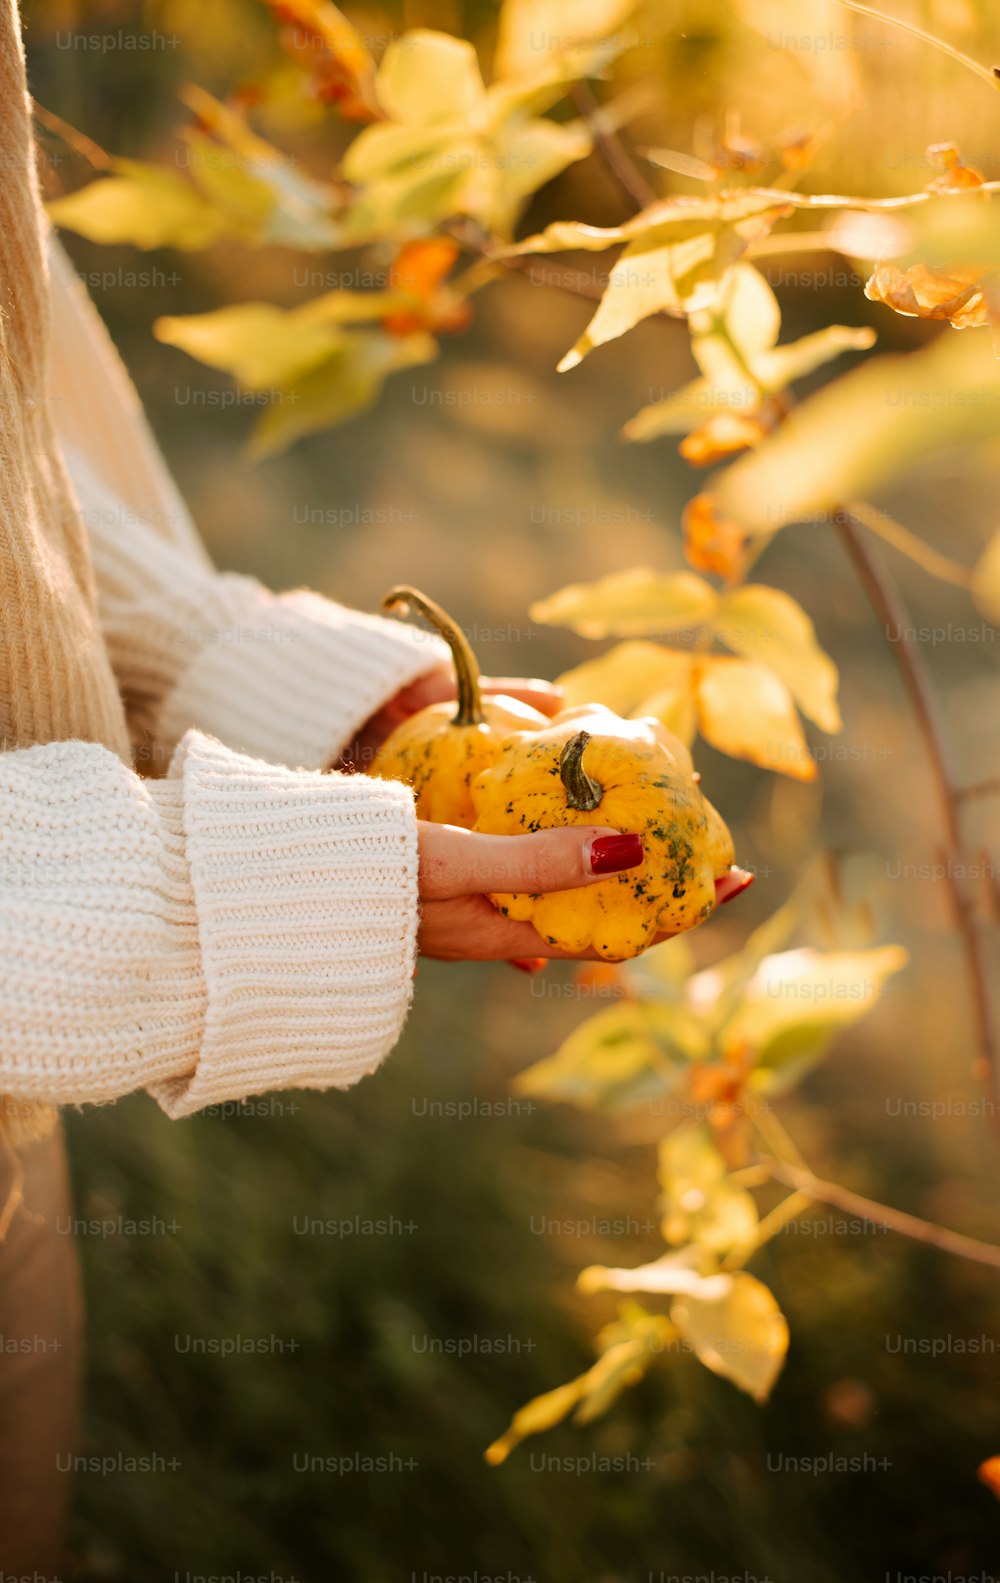 a person holding a yellow pepper in their hand